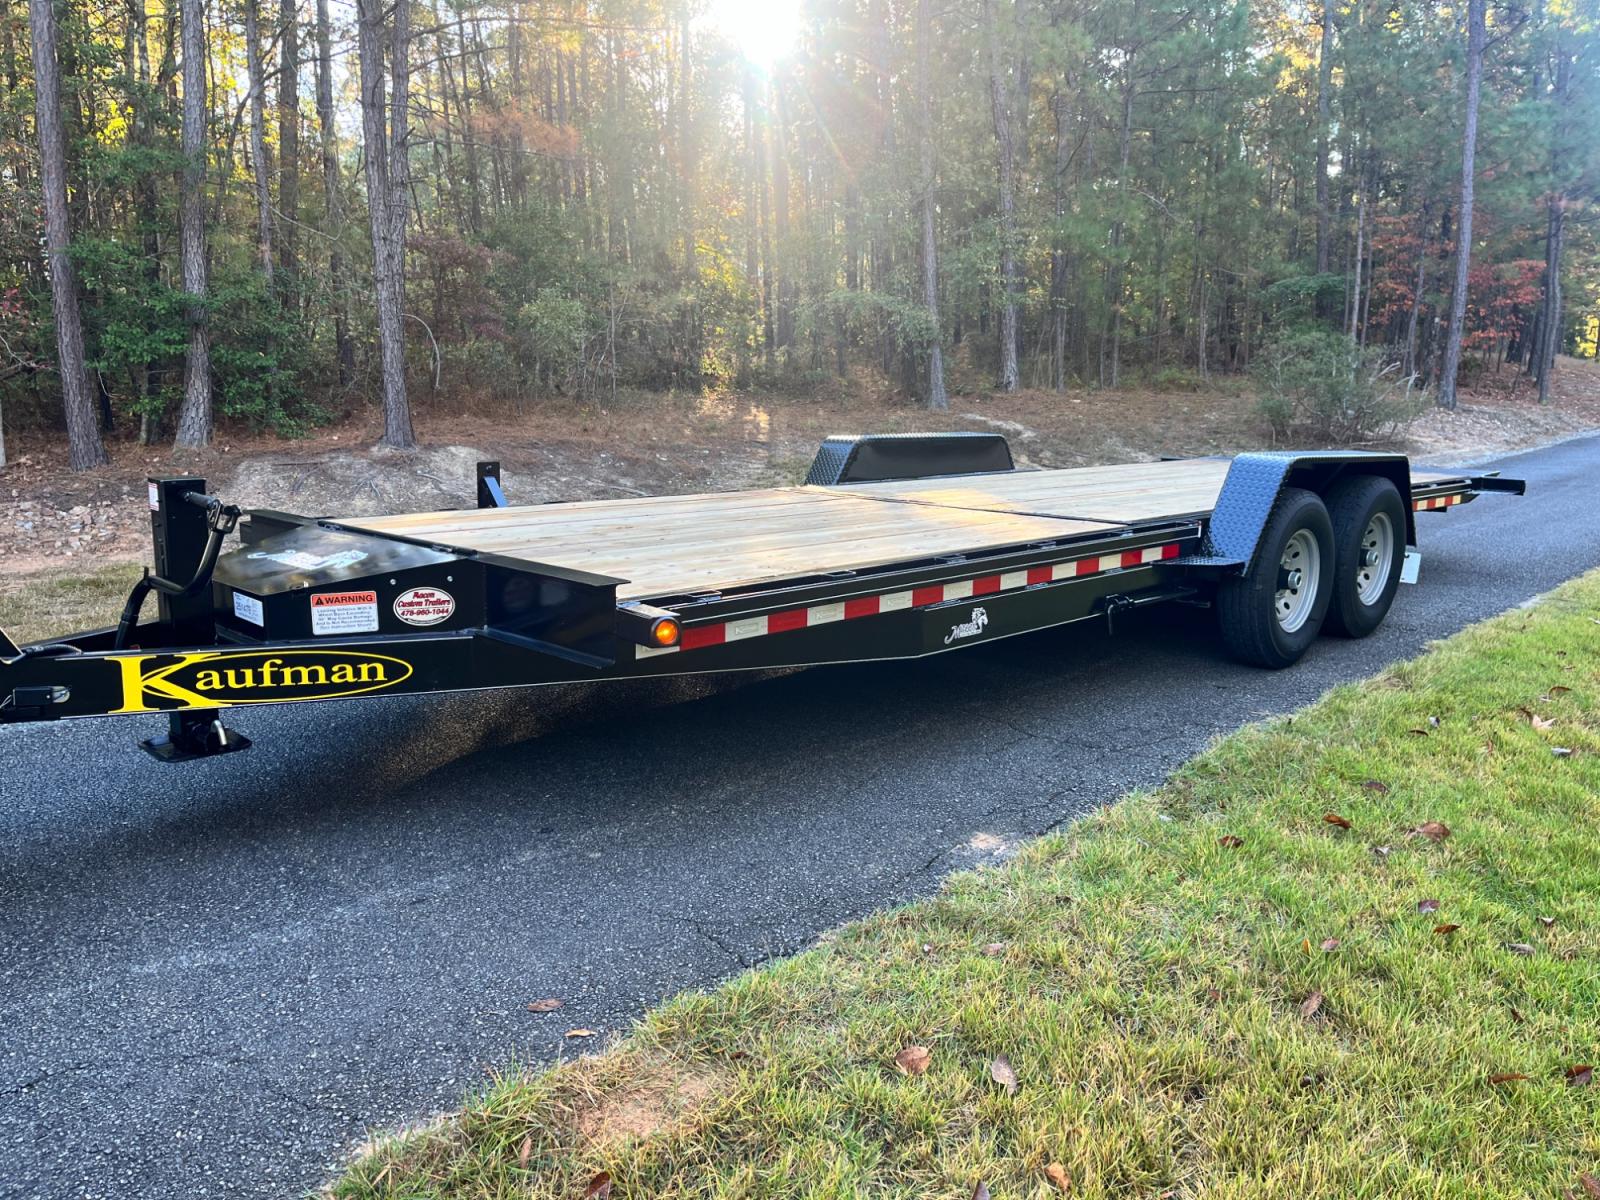 2023 Black Kaufman Trailers 7ft X 22ft Tilt Bed , located at 1330 Rainey Rd., Macon, 31220, (478) 960-1044, 32.845638, -83.778687 - Brand New 2023 Model "Top of the Line" Kaufman Brand 7ft X 22ft Includes the 14ft Tilt Bed at Rear! 8ft Fixed Front Deck! 7 Ton Tilt Bed Flatbed BobCat & Equipment Trailer! Haul Your Truck, Tractor, BobCat, Mini-Excavator, UTV's, ATV's Etc. Tandem 7,000lb Dexter Axles, Electric Brakes on Both Ax - Photo #16